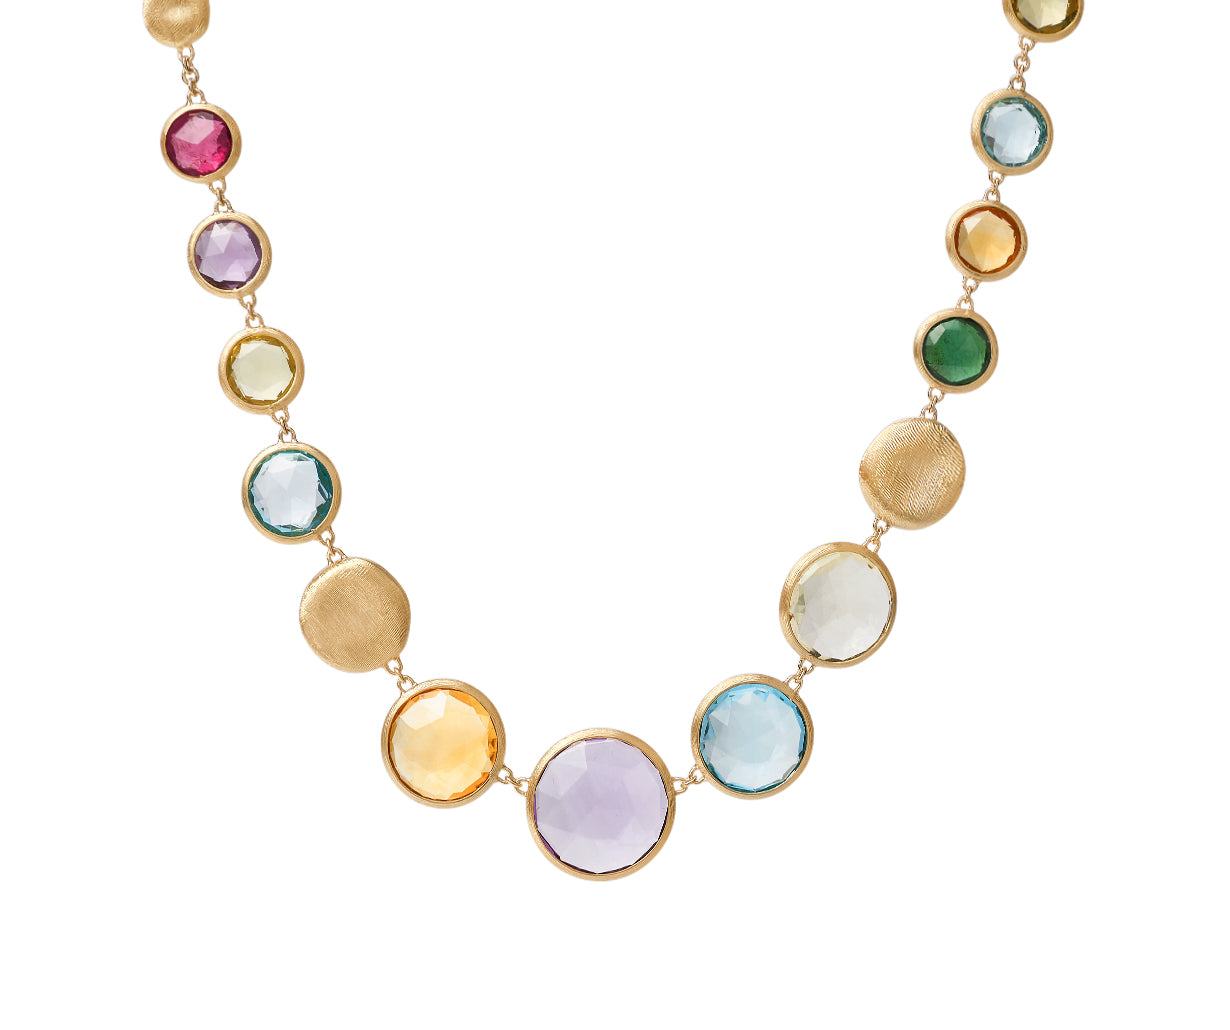 Marco Bicego 18k White Gold Colored Gemstone Necklace